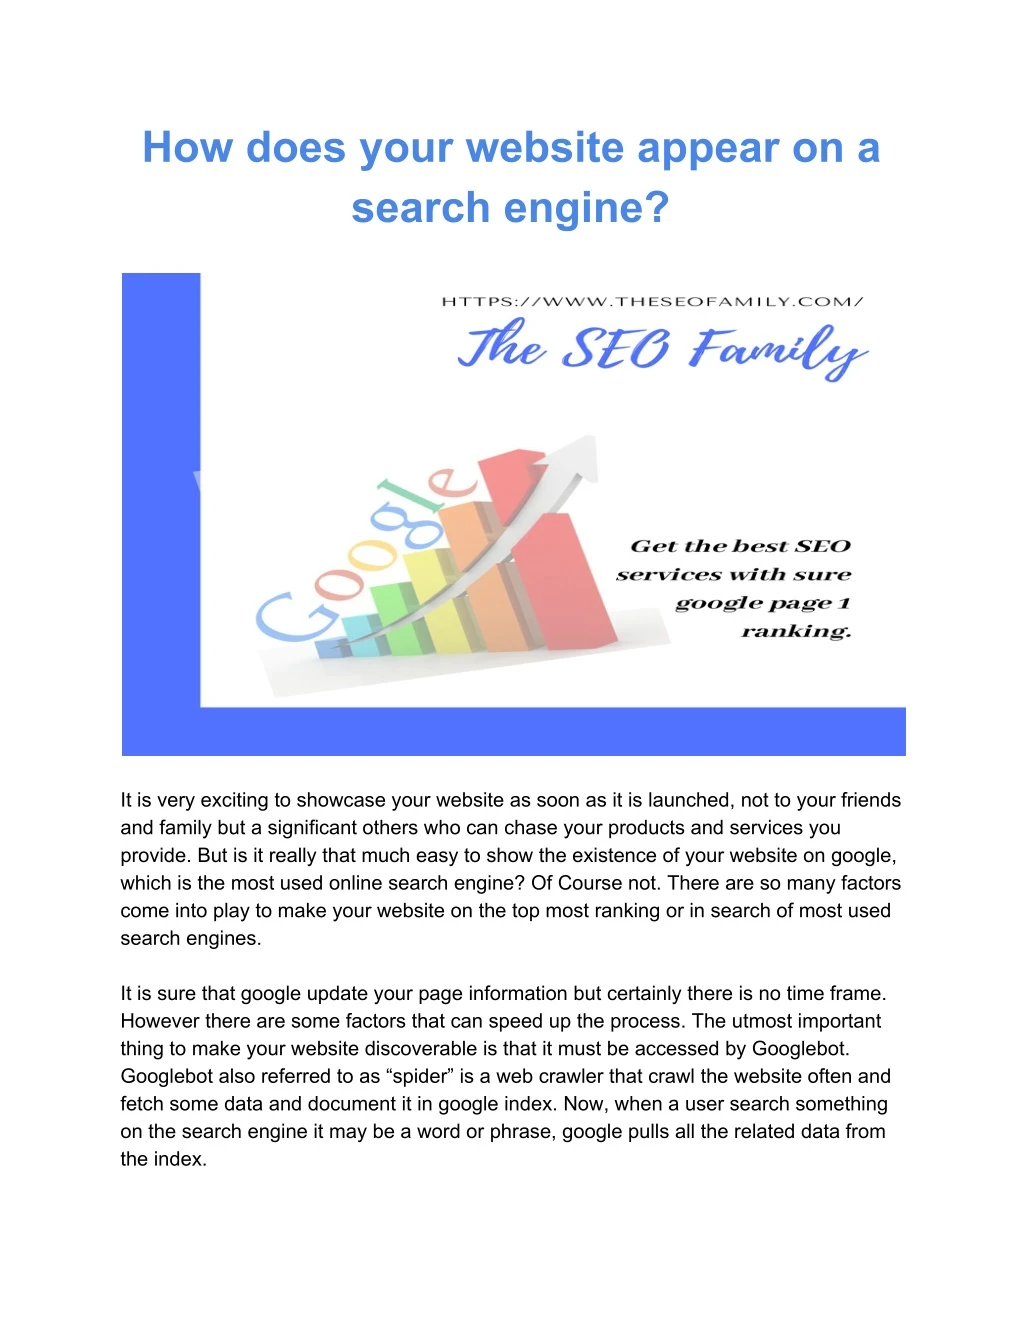 how does your website appear on a search engine